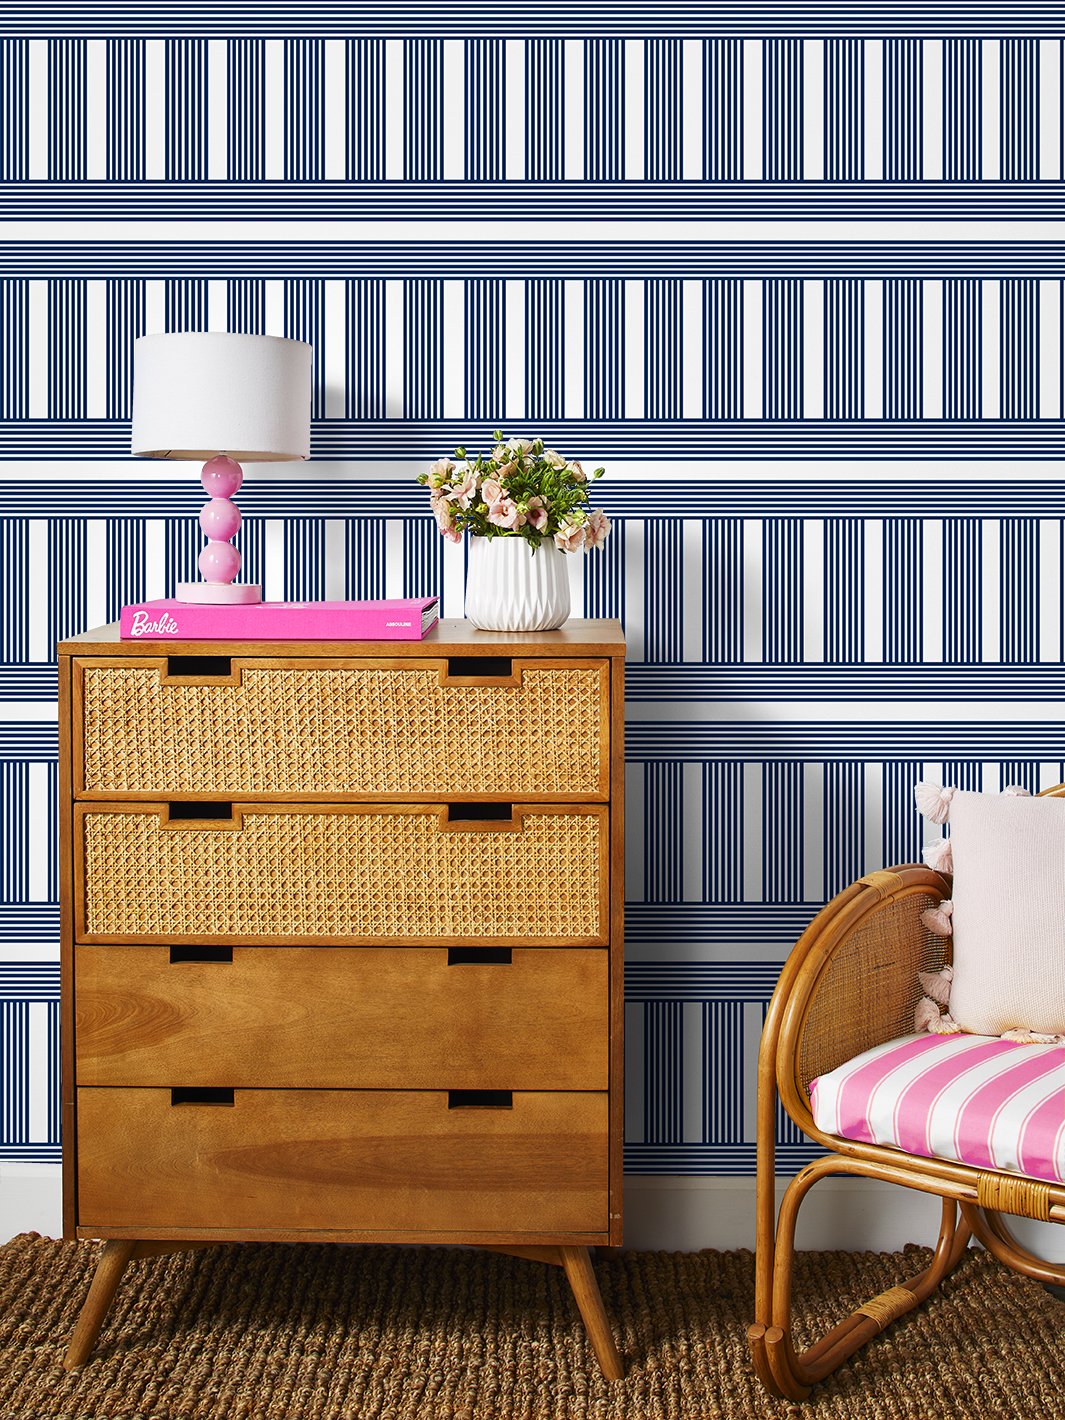 'Roman Holiday Grid' Wallpaper by Barbie™ - Navy